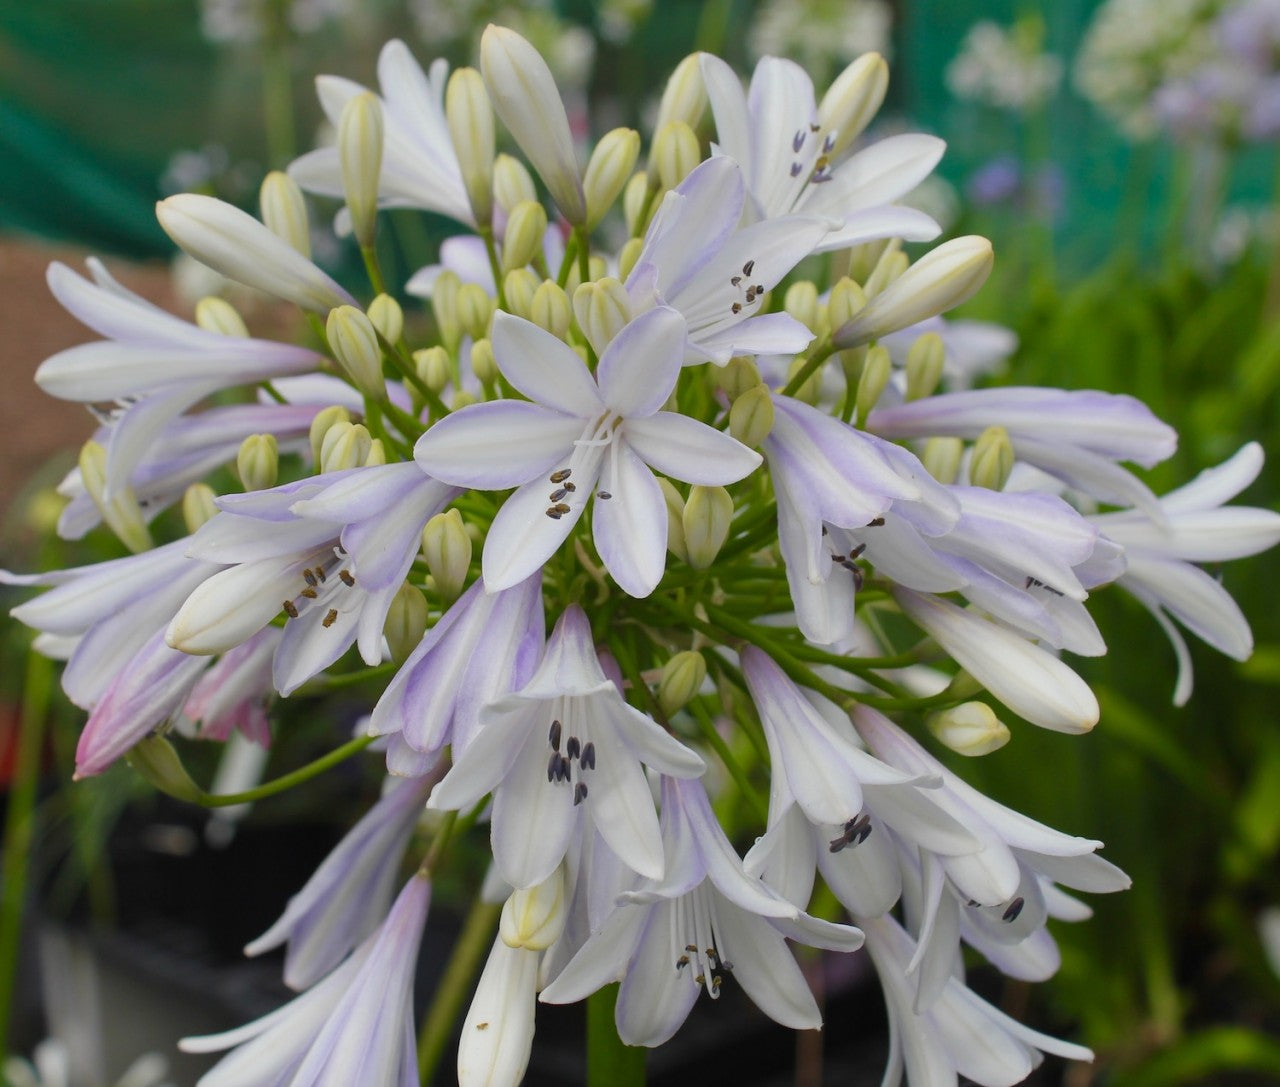 Agapanthus Madison ™ - special 20 pack of young plants